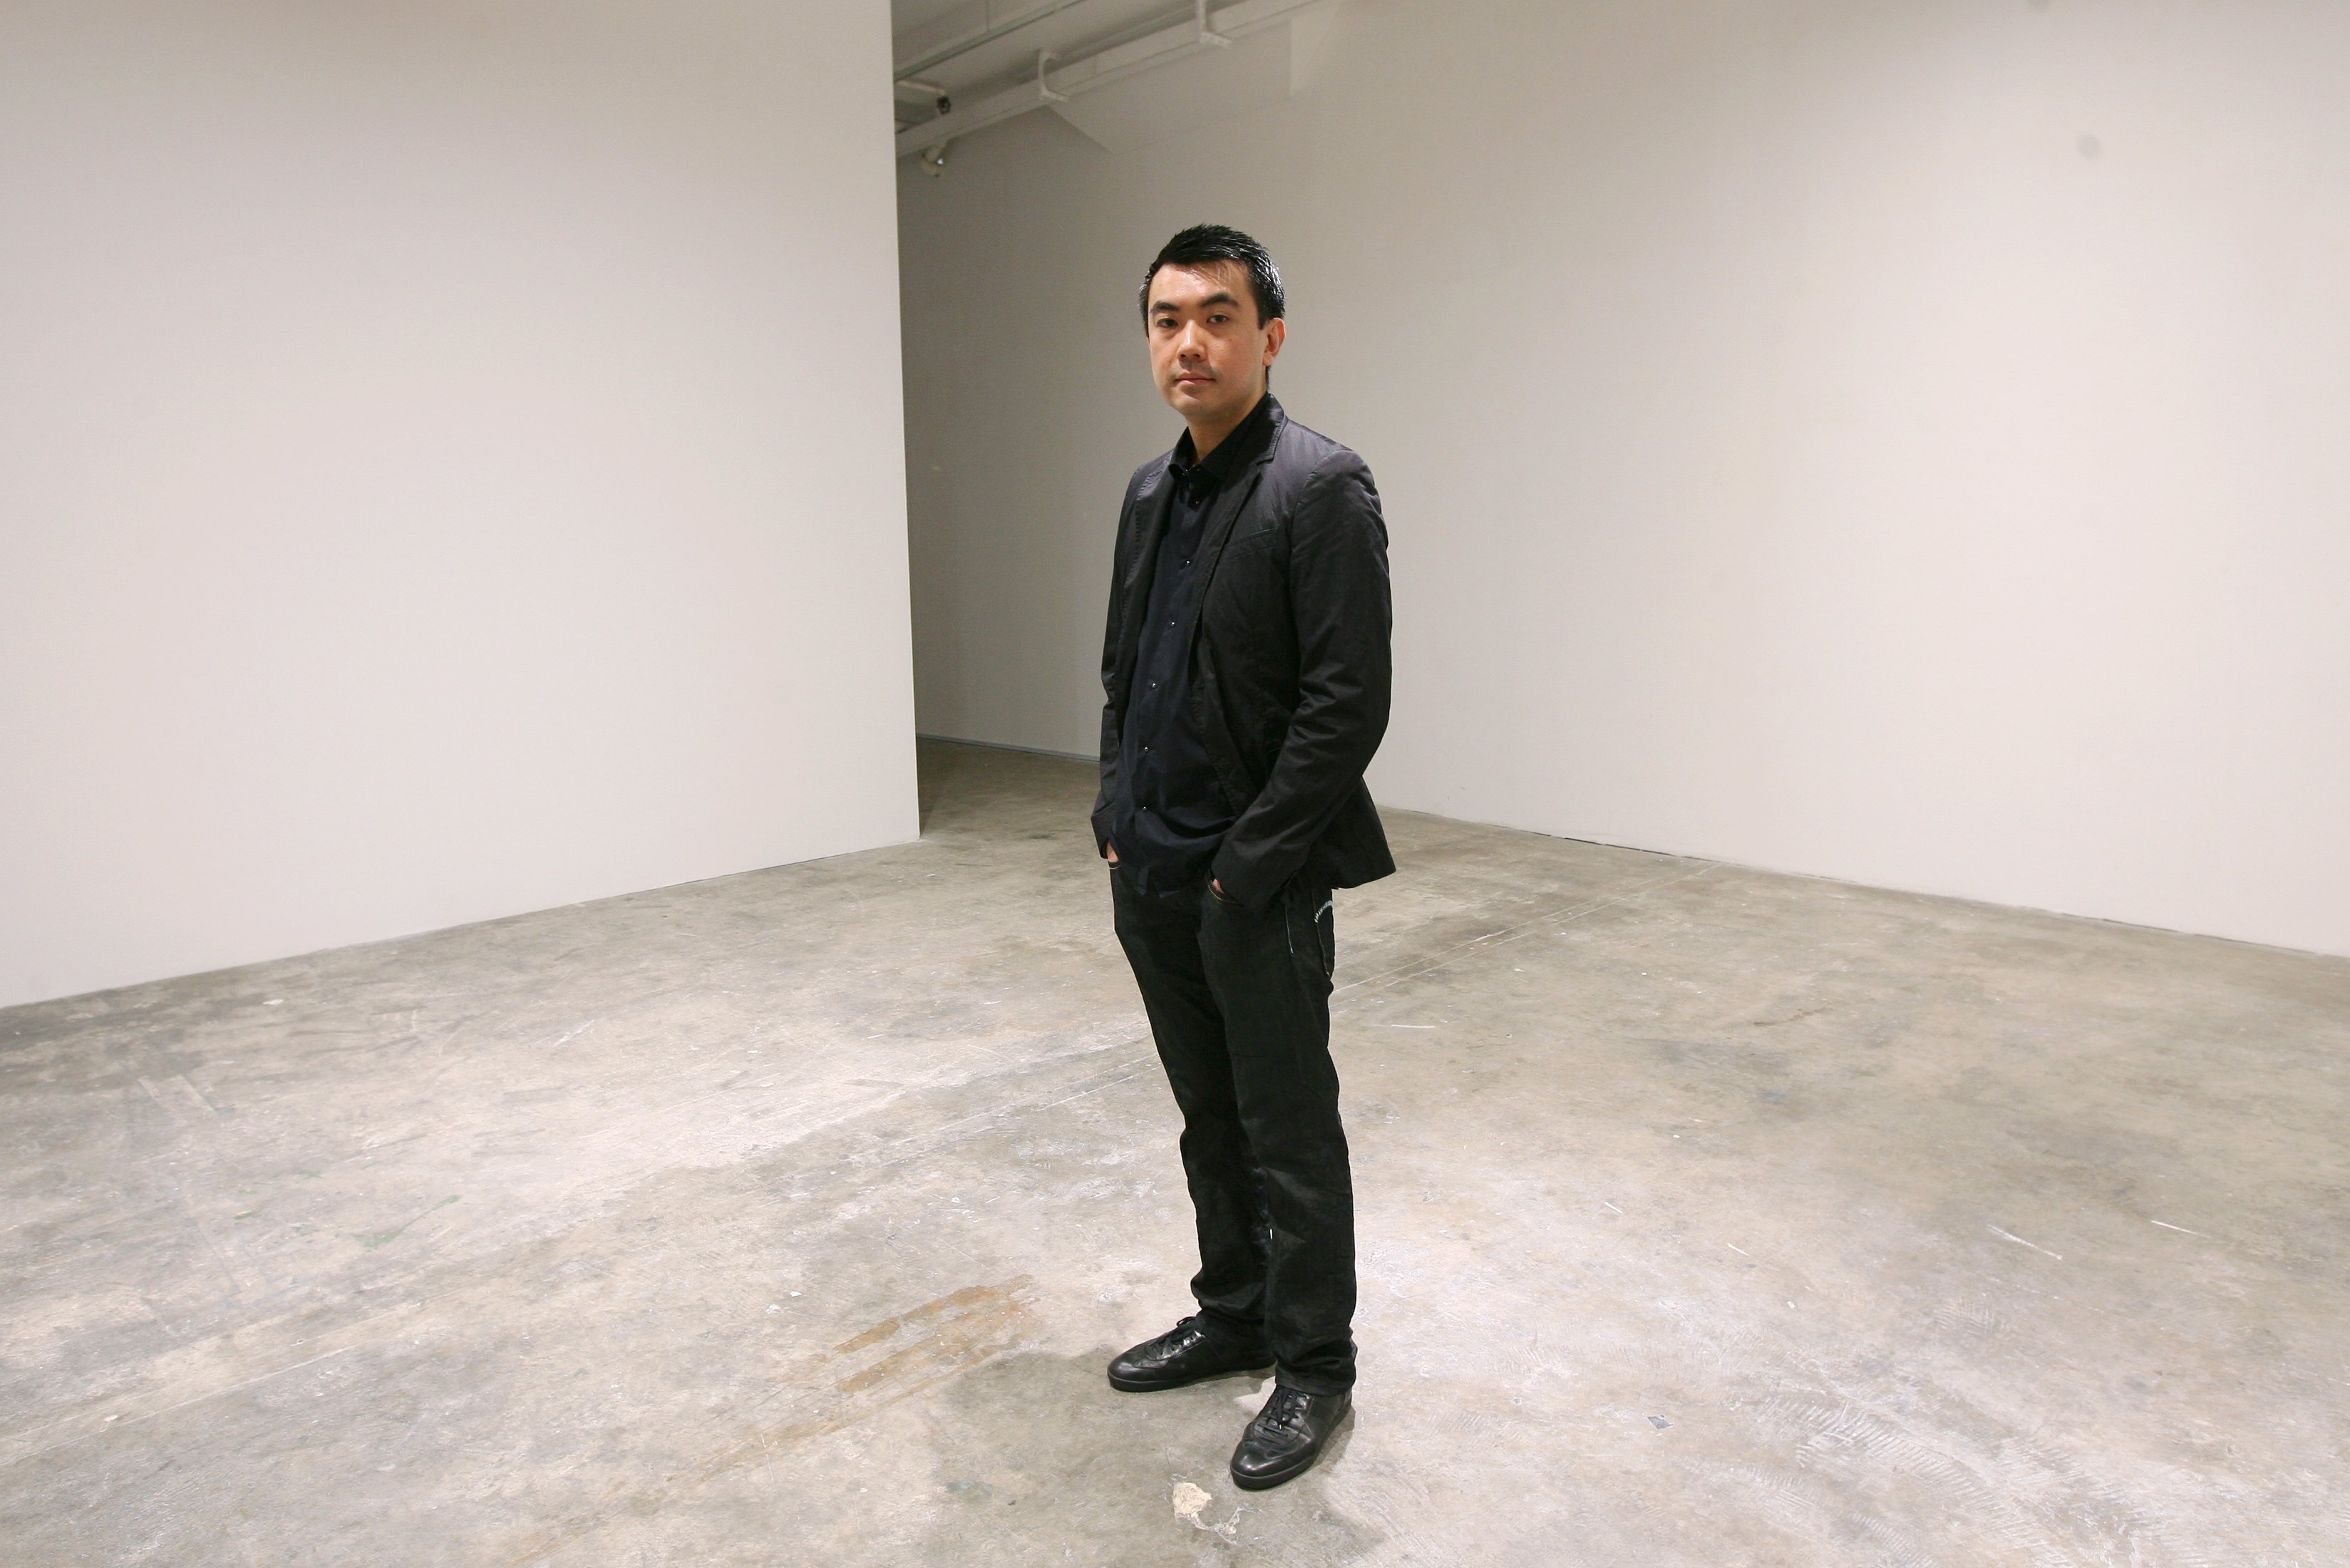 Eugene Tan, who spent time in Hong Kong as director of exhibitions for Osage Gallery before taking up his role with the National Gallery Singapore. Photo: Dickson Lee